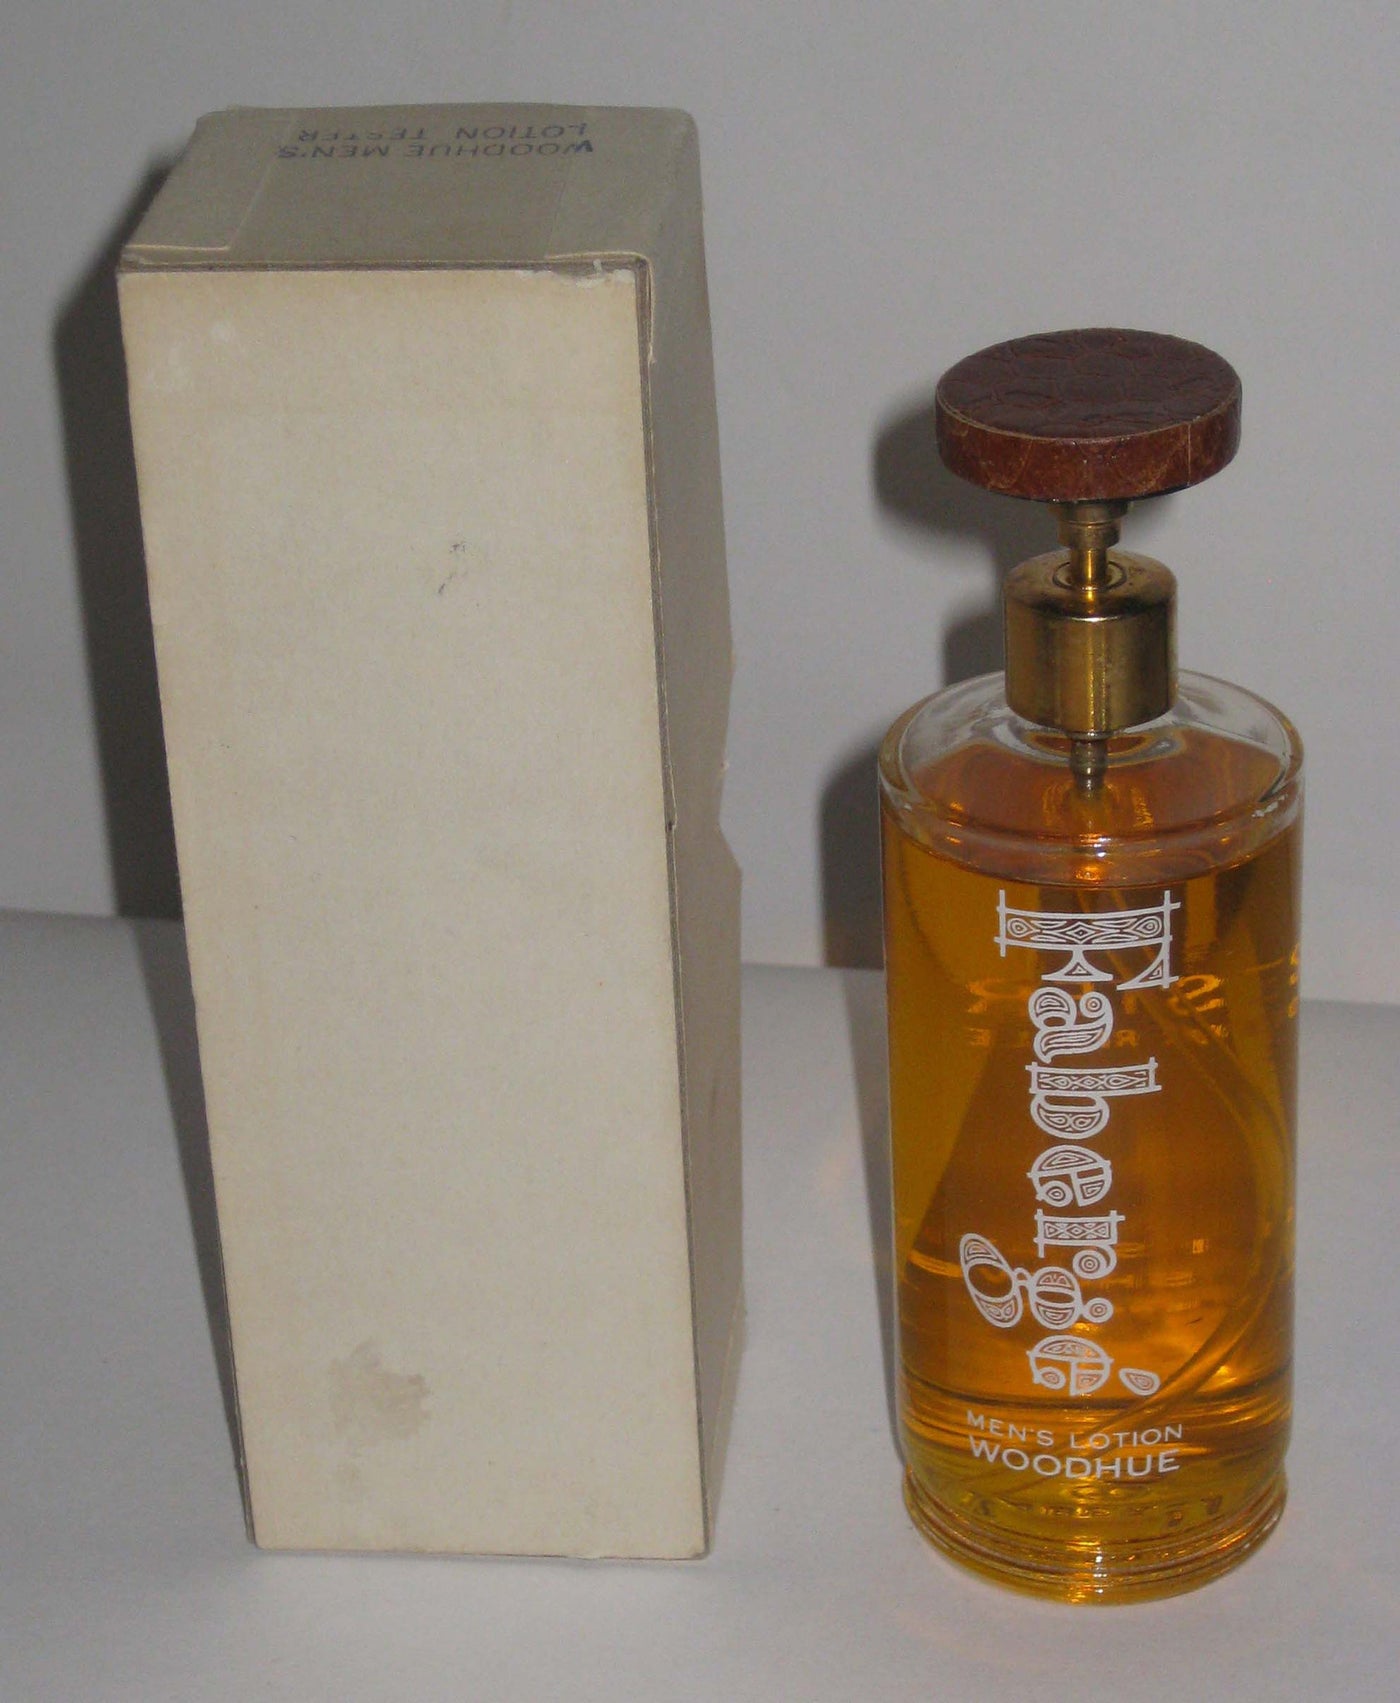 Faberge Woodhue Men's Lotion After Shave